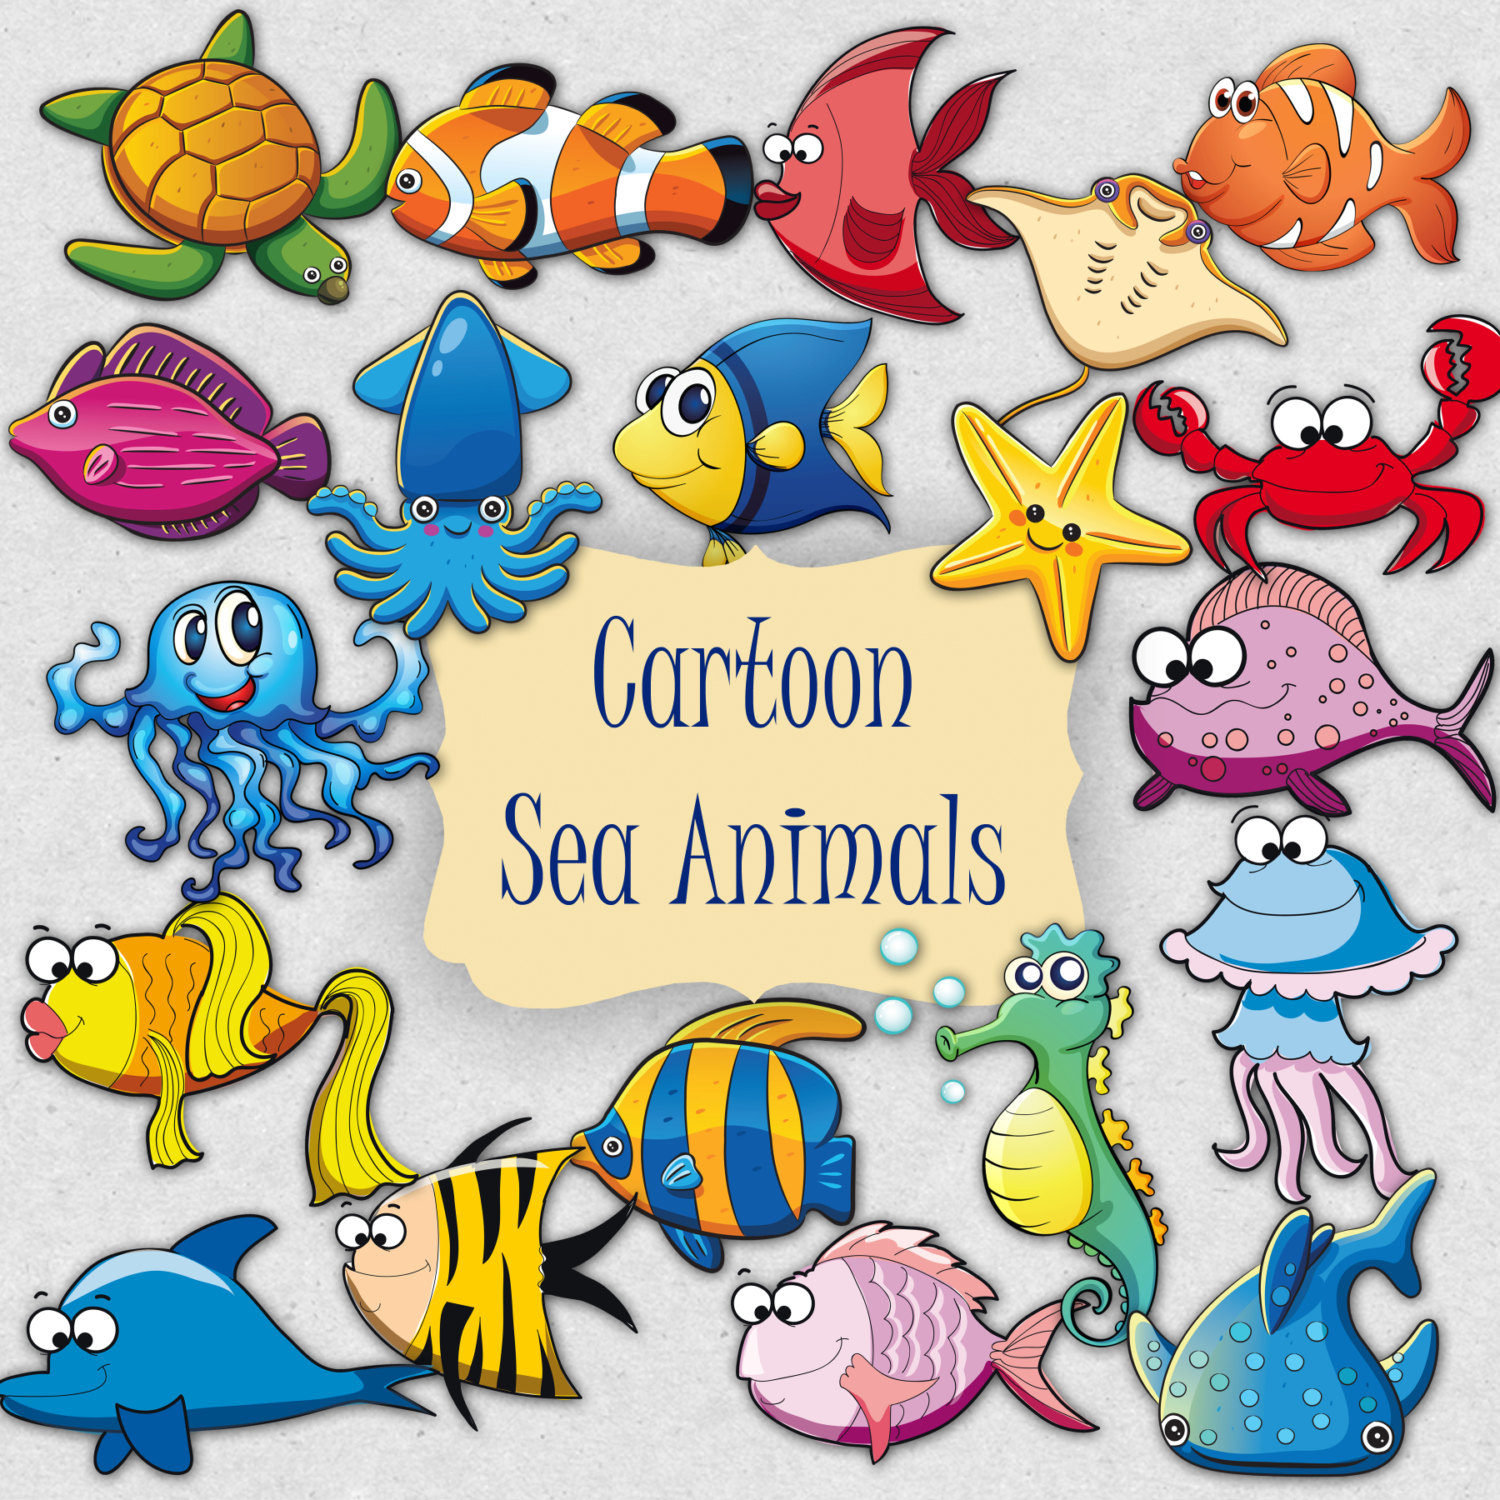 Popular items for sea animals clipart on Etsy